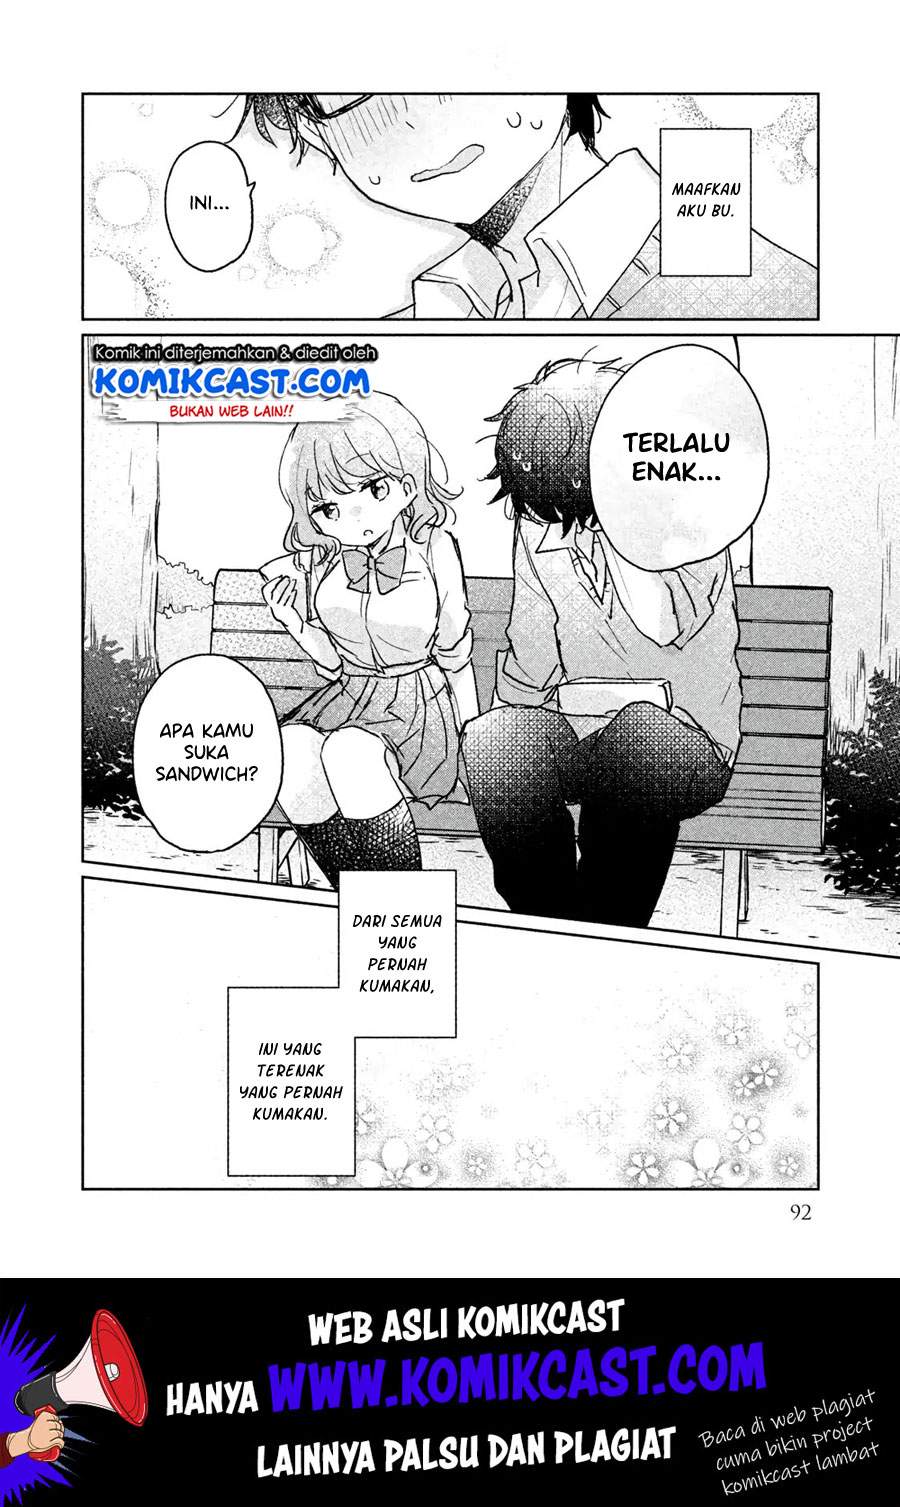 It’s Not Meguro-san’s First Time Chapter 07 Bahasa Indonesia